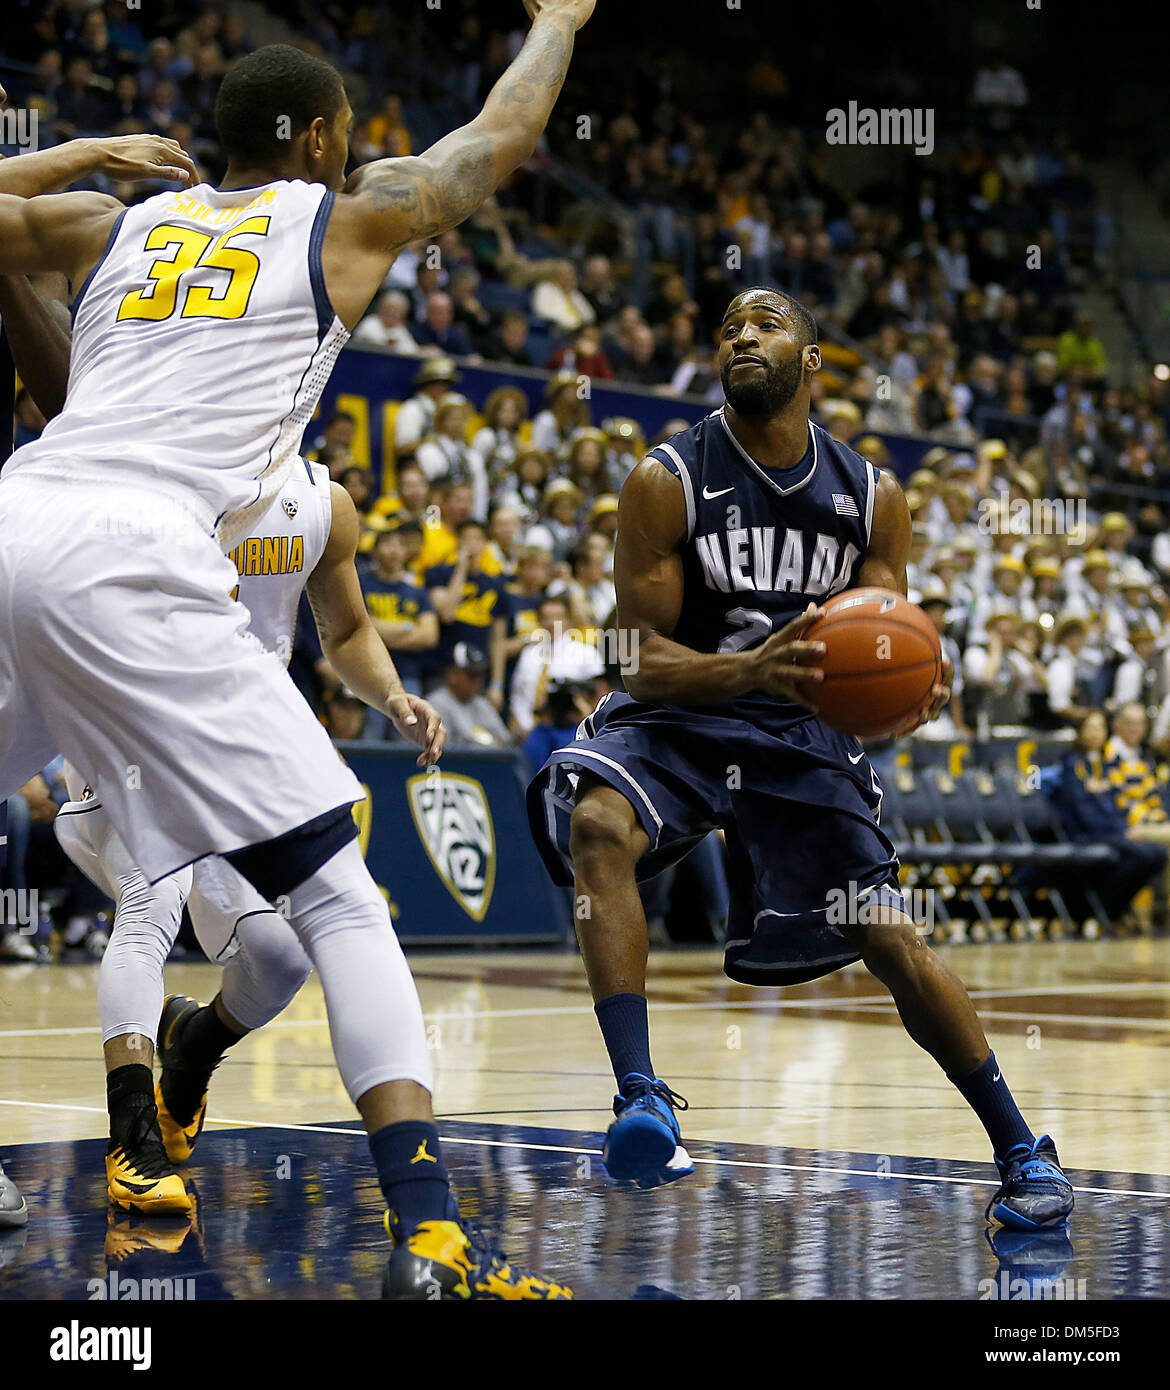 Berkeley, CA, USA. 10th Dec, 2013. Nevada G # 24 Deonte Burton challenge  Cal # 35 Richard Solomon in the paint and score during NCAA Mens Basketball  game between University of Nevada